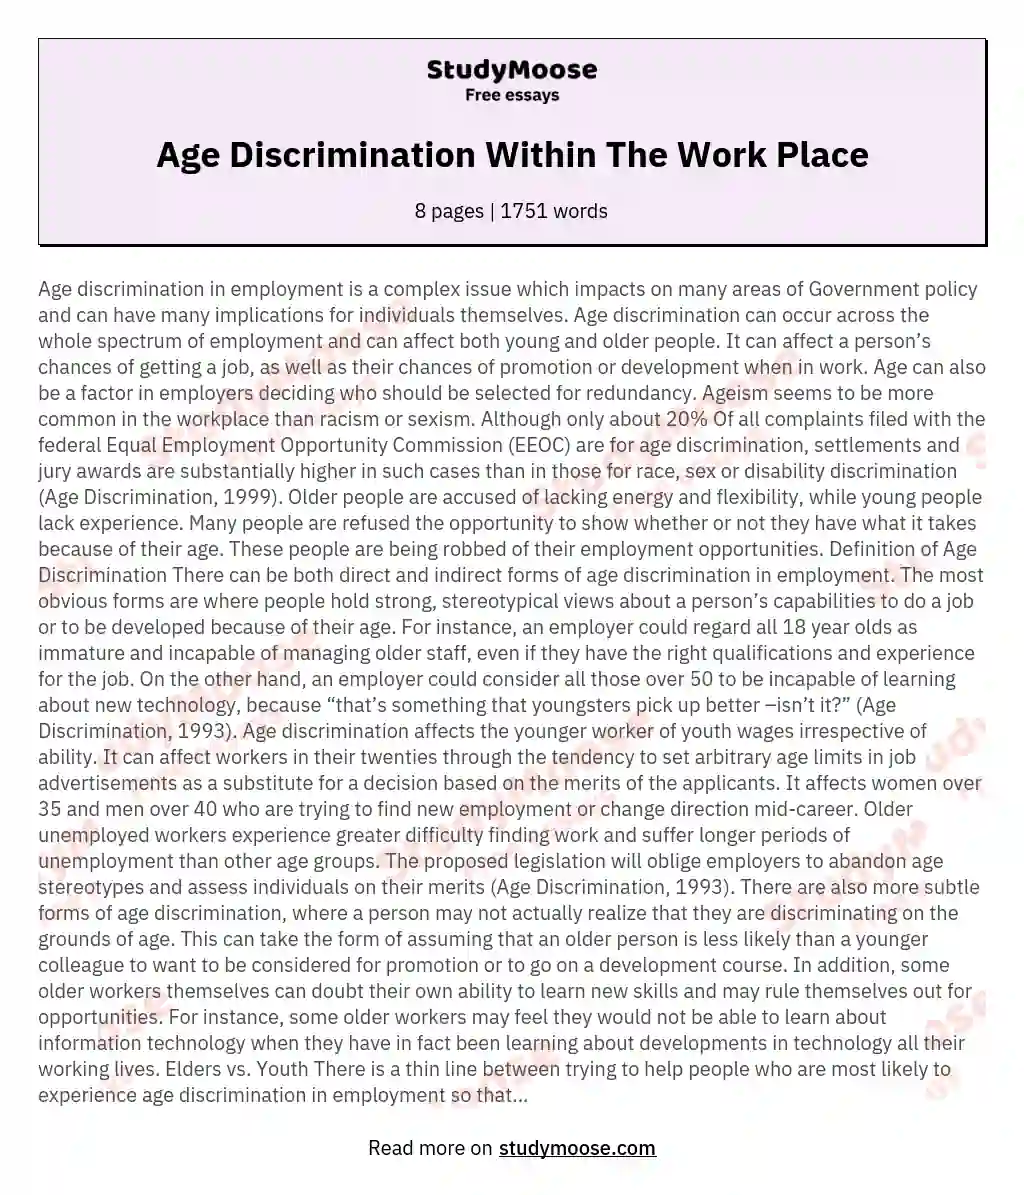 Age Discrimination Within The Work Place